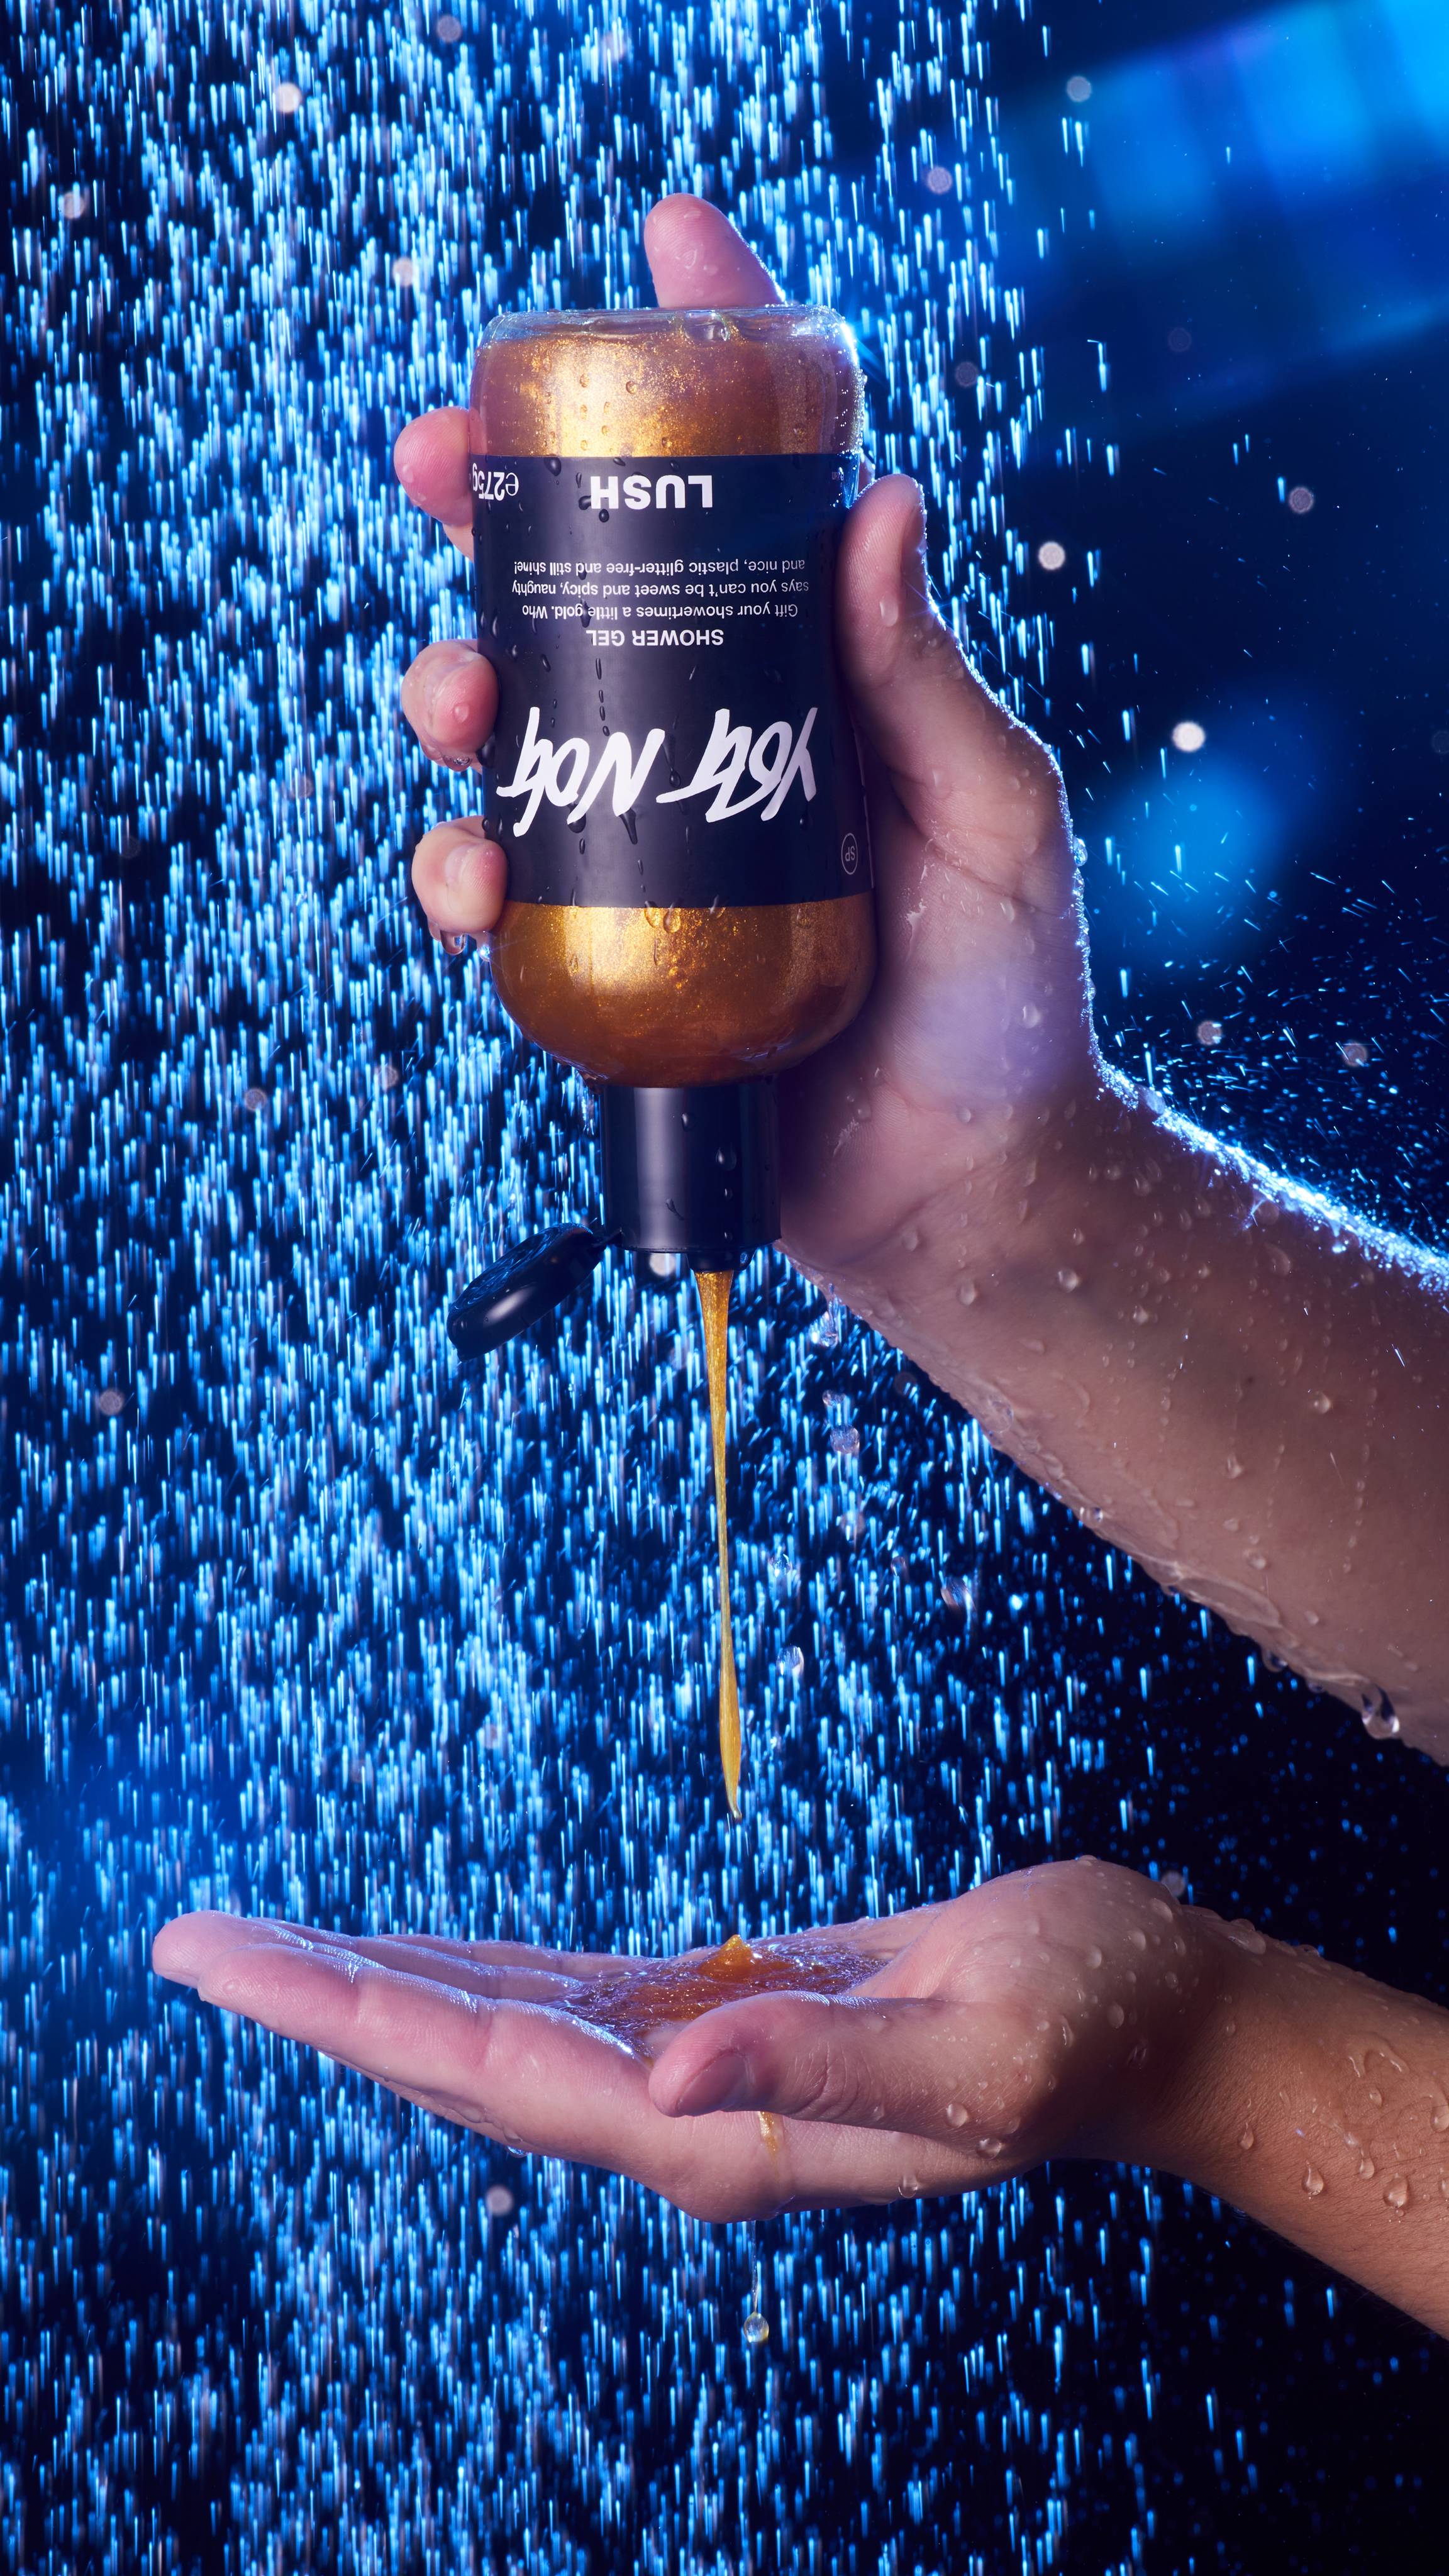 Image shows the model squeezing the bottle of Yog Nog shower gel into their hand under running shower water. 